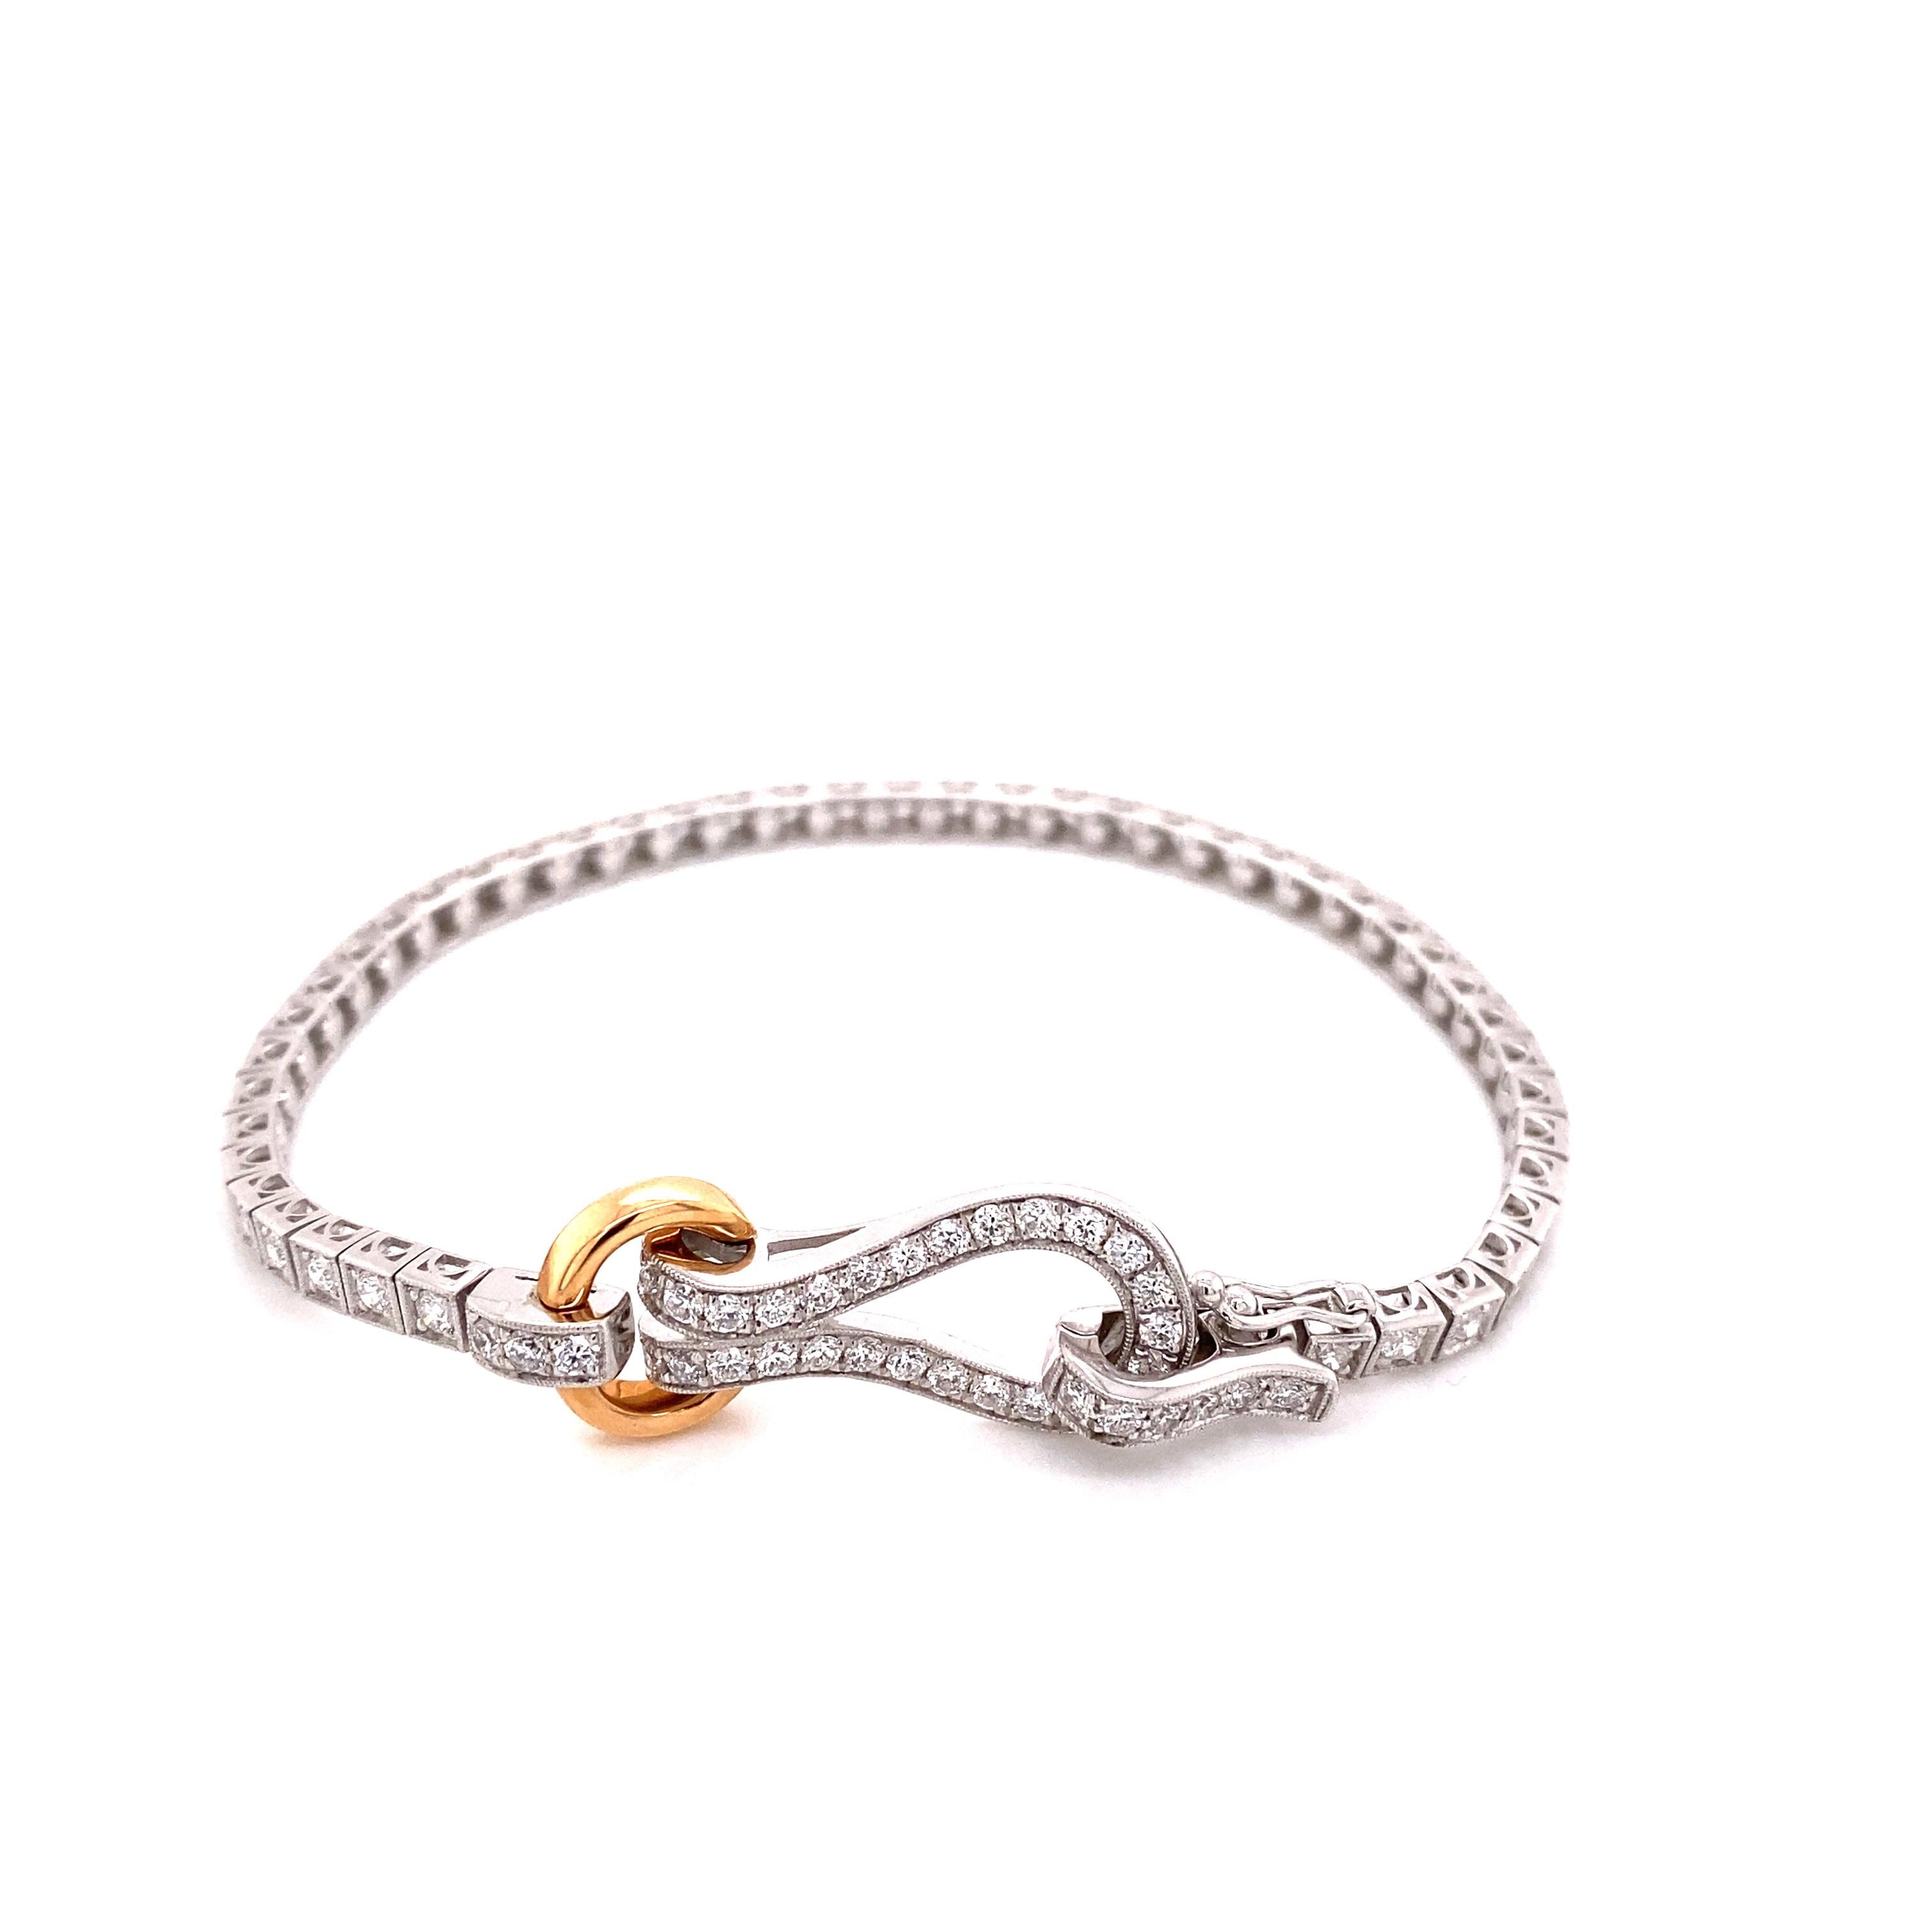 This bracelet from Simon G. features 2.00 carat total weight in round brilliant cut diamonds set in 18 karat white and rose gold with a unique buckle clasp. It is approximately 7